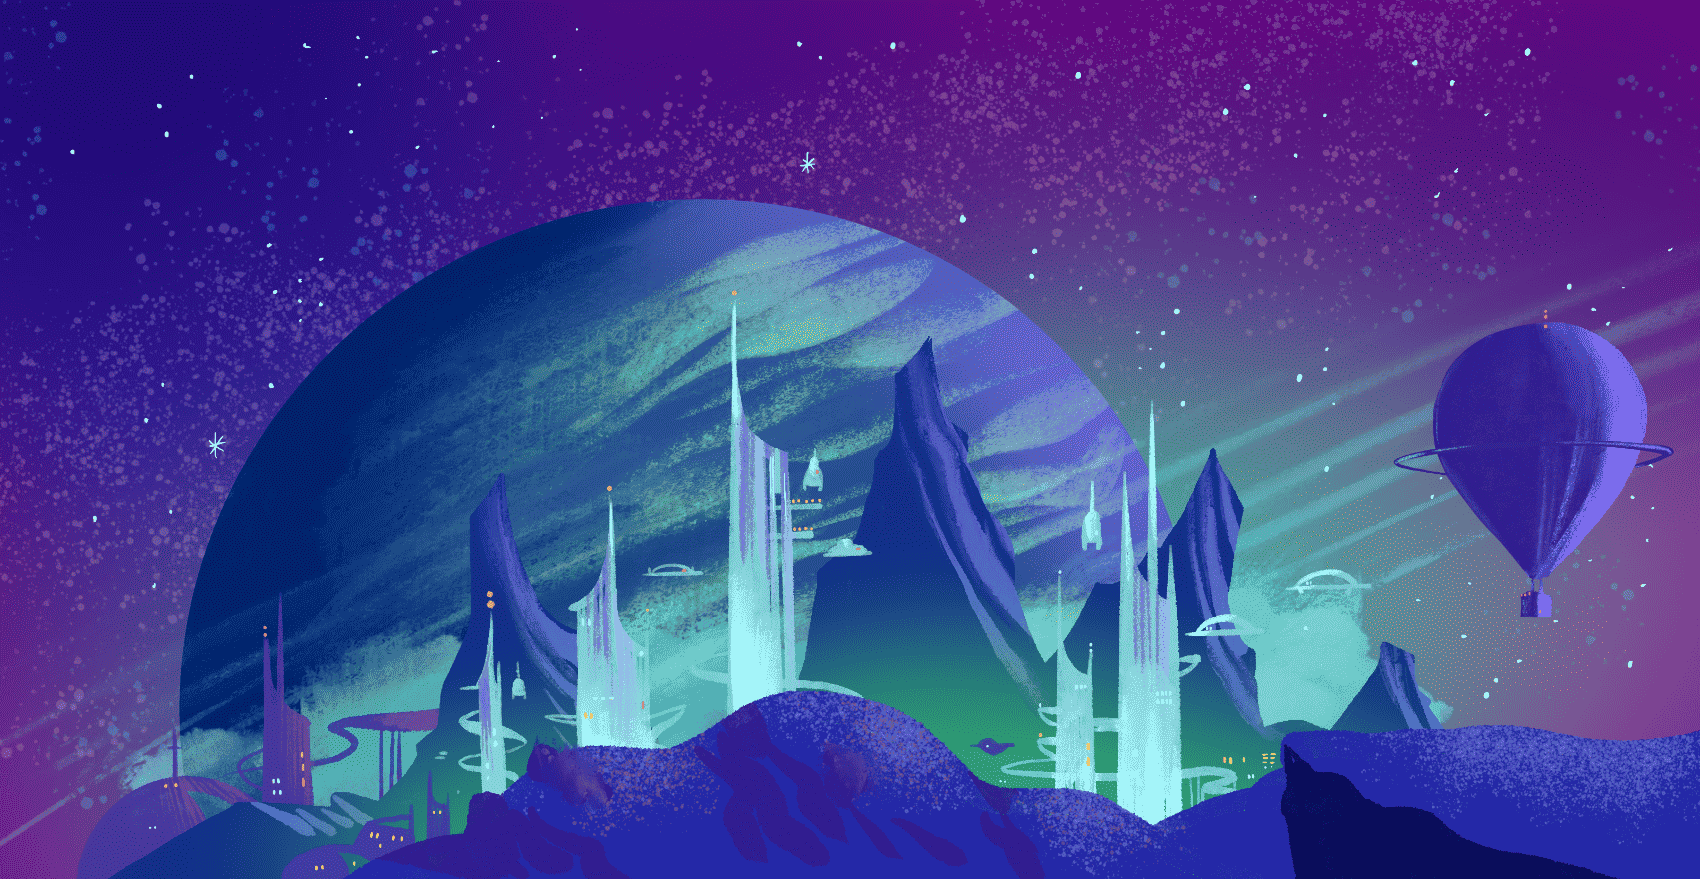 A futuristic cityscape on a distant moon depicting flying balloons, craggy mountains, skyscrapers, and space.